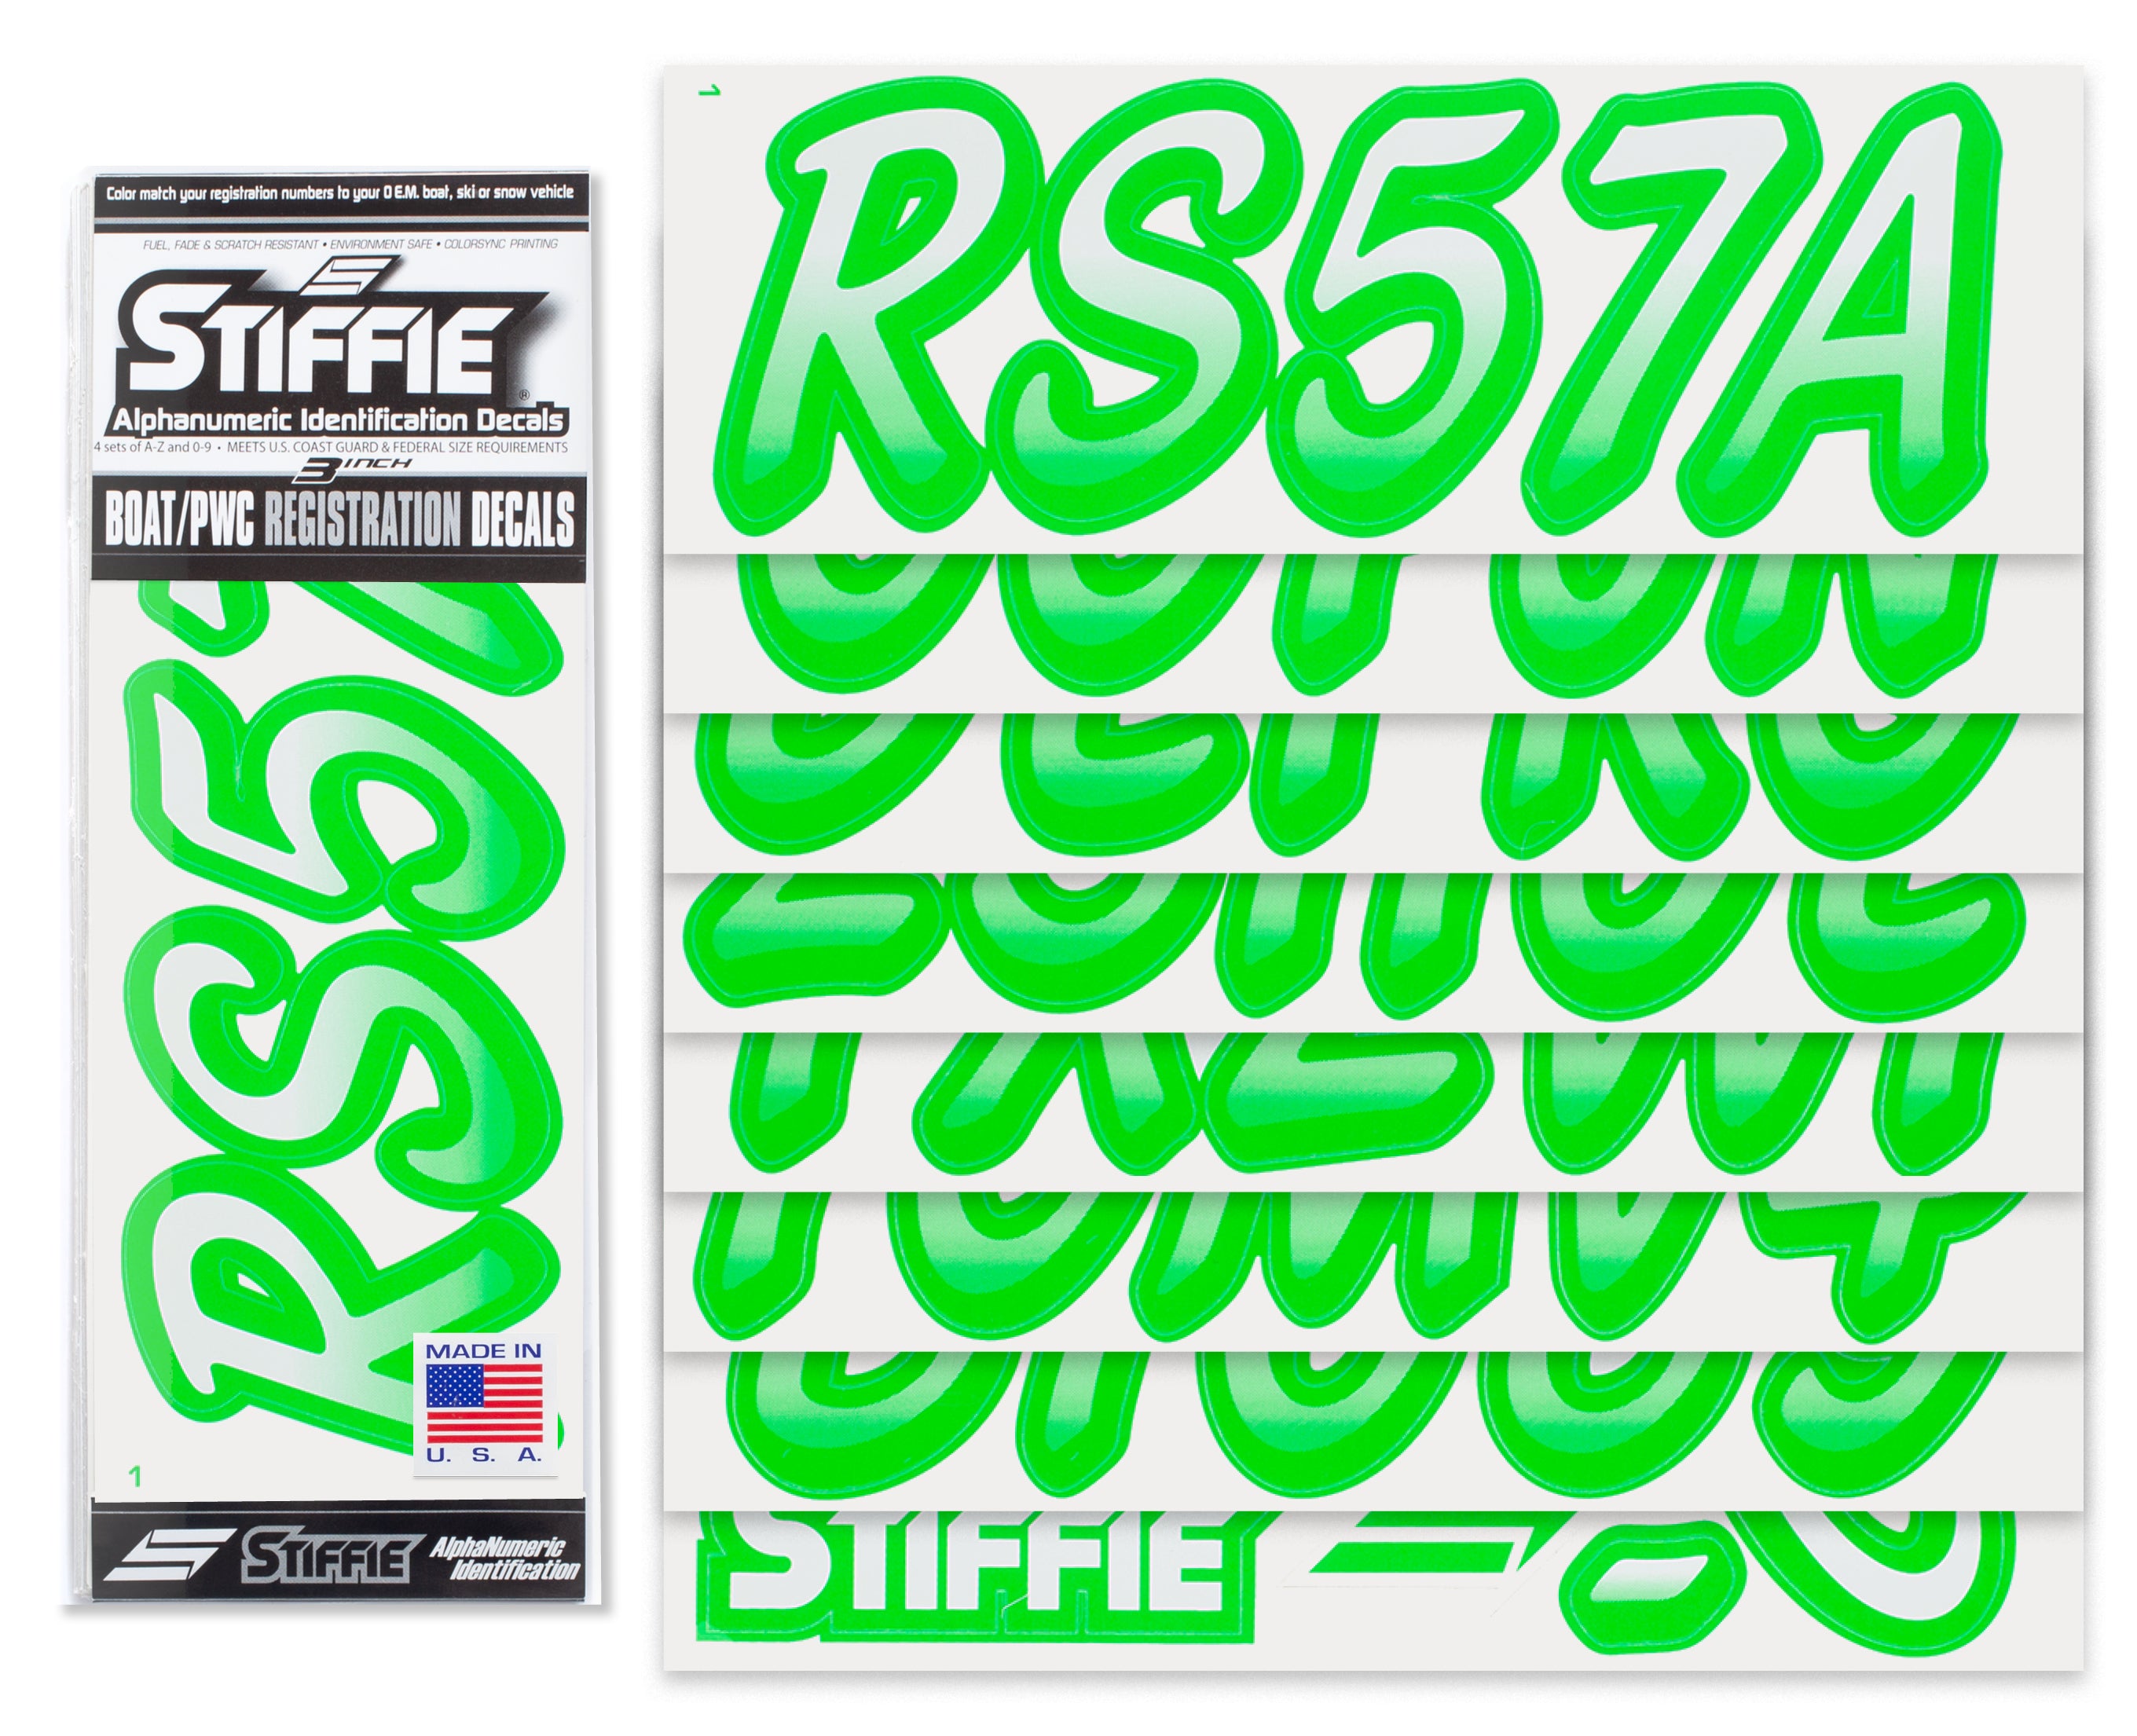 Stiffie Whipline White/Electric Green 3" Alpha-Numeric Registration Identification Numbers Stickers Decals for Boats & Personal Watercraft